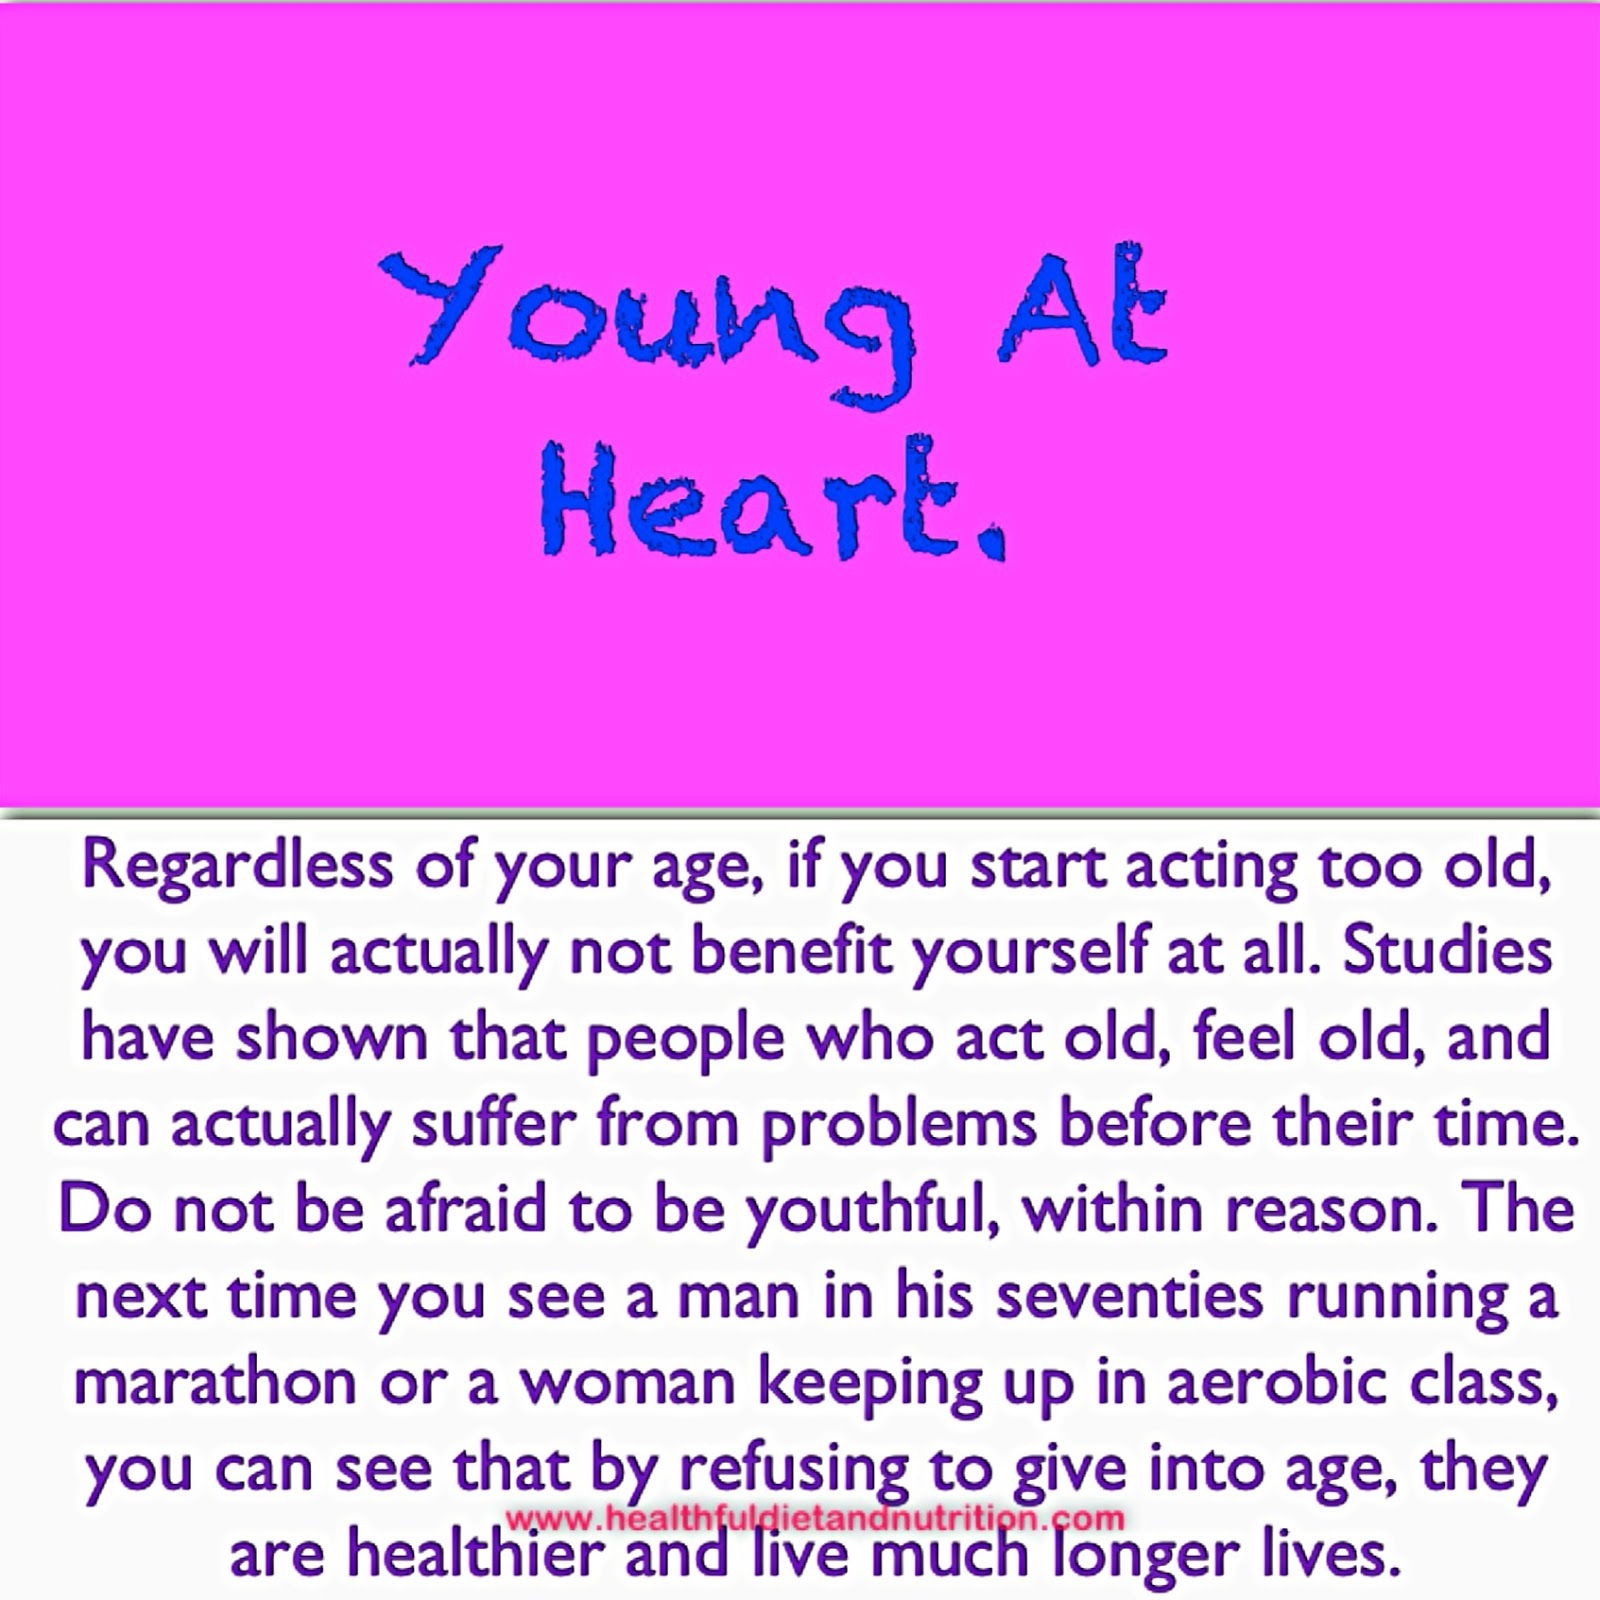 Stop Acting Old - Stay Youthful